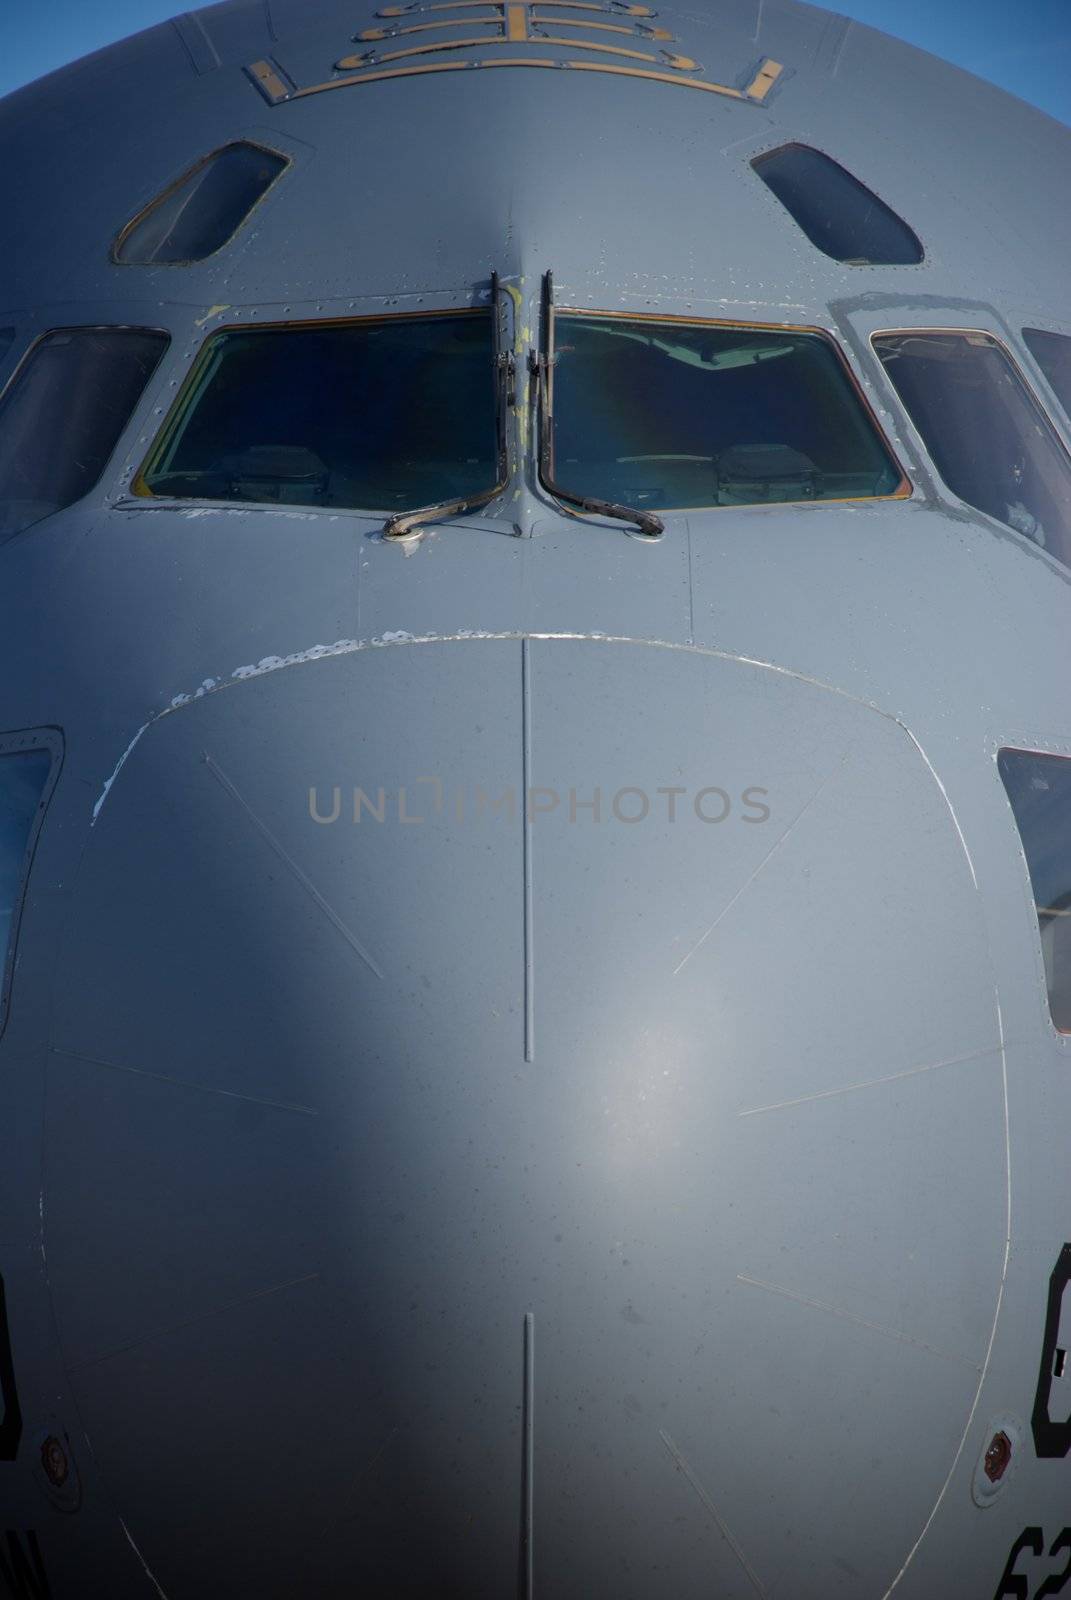 Nose of a Large Air Force Jet by pixelsnap